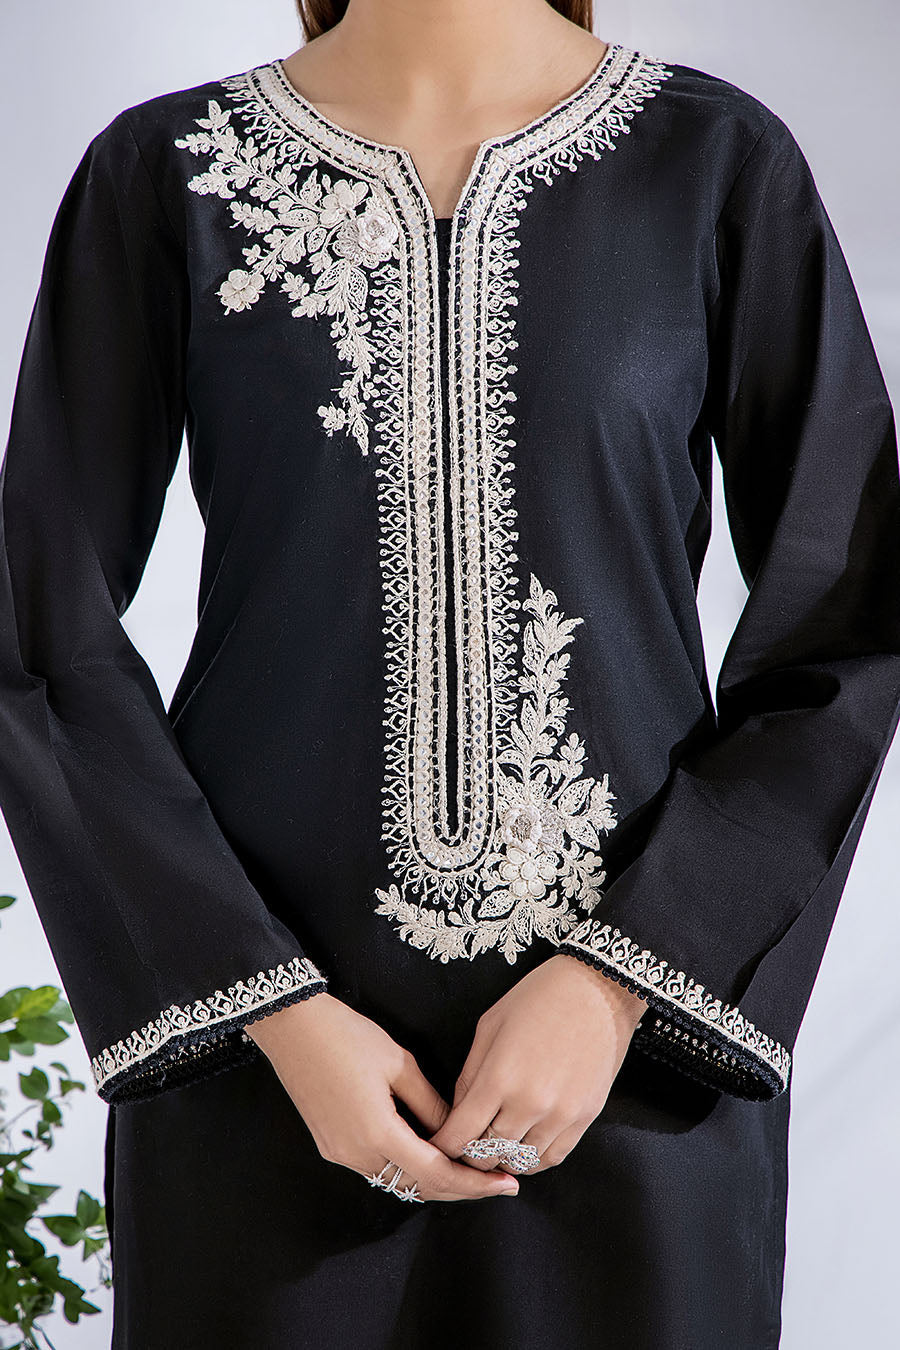 Classic Black Beauty: Cotton Embroidered Shirt with Net Dupatta.